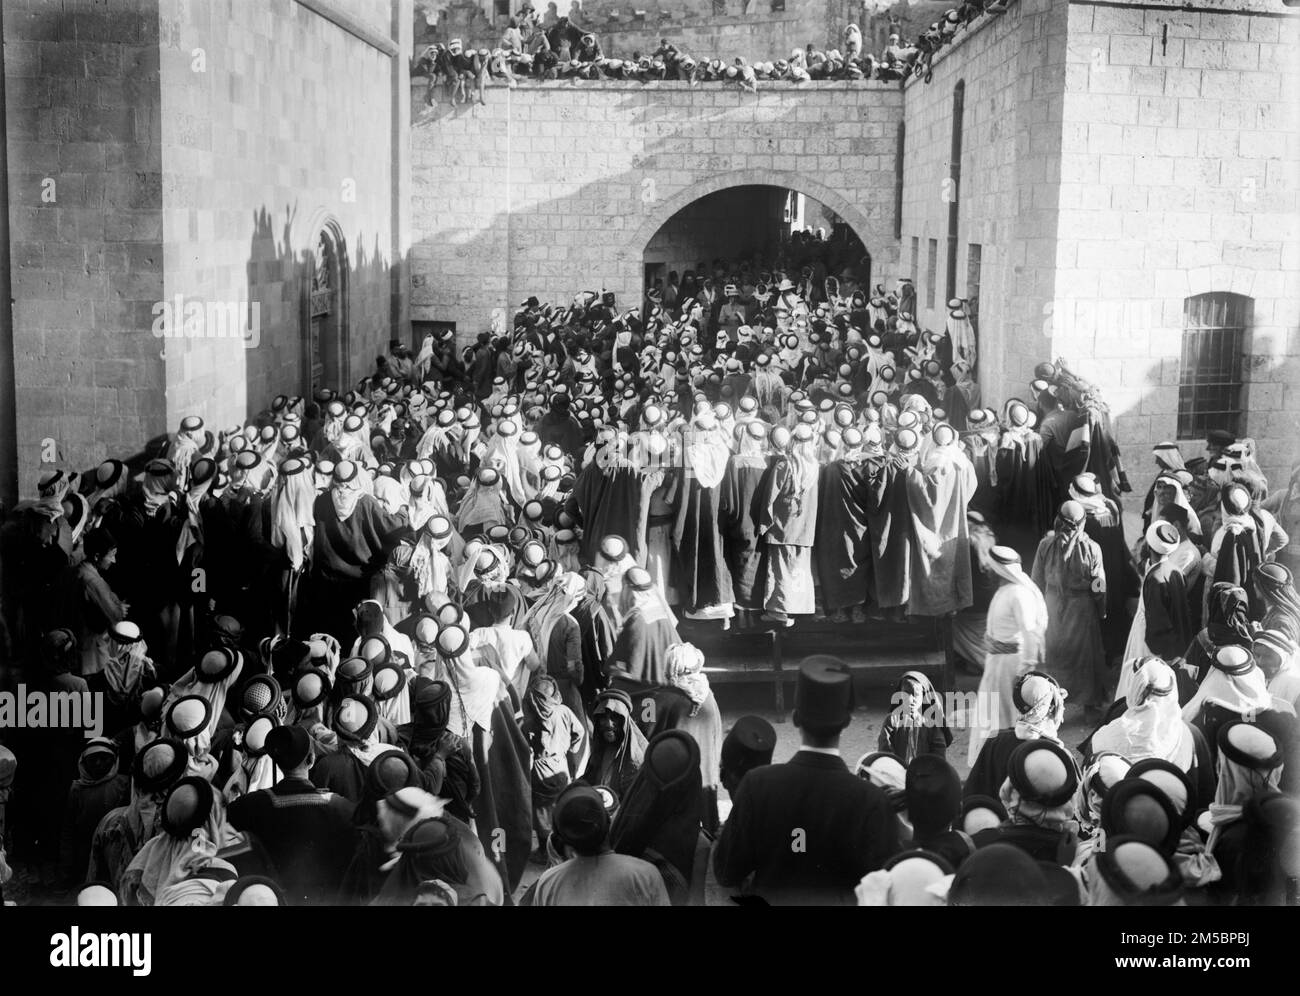 Crowds in the street during the British High Commissioner first visit to Transjordan, in Es-Salt on 20th August 1920 Stock Photo